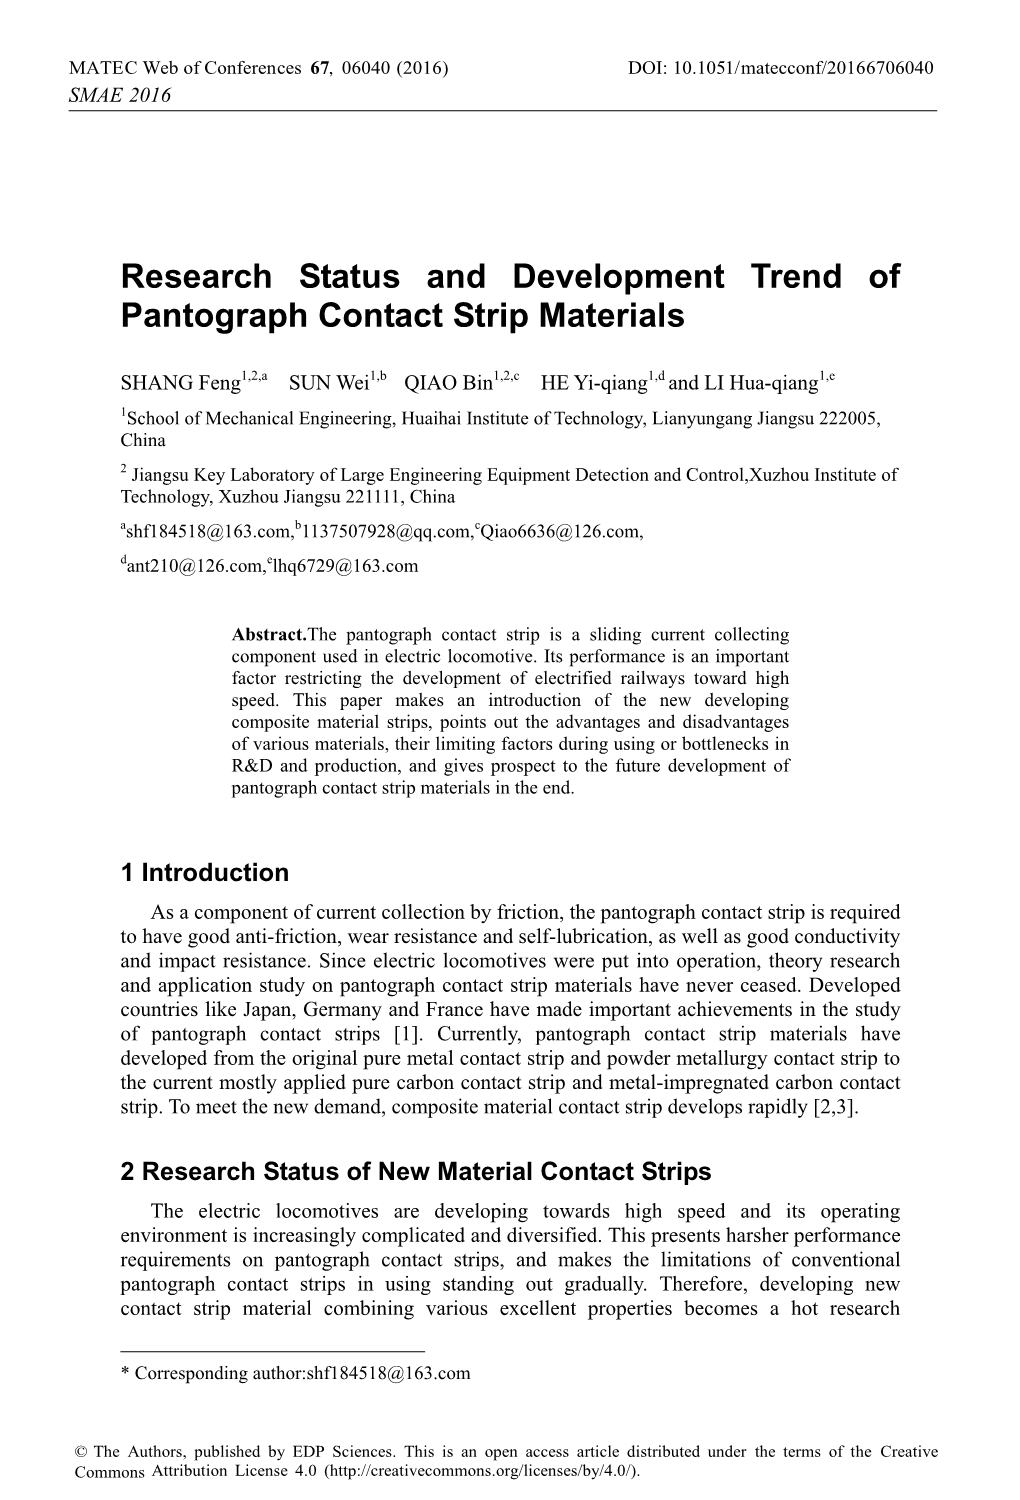 Research Status and Development Trend of Pantograph Contact Strip Materials